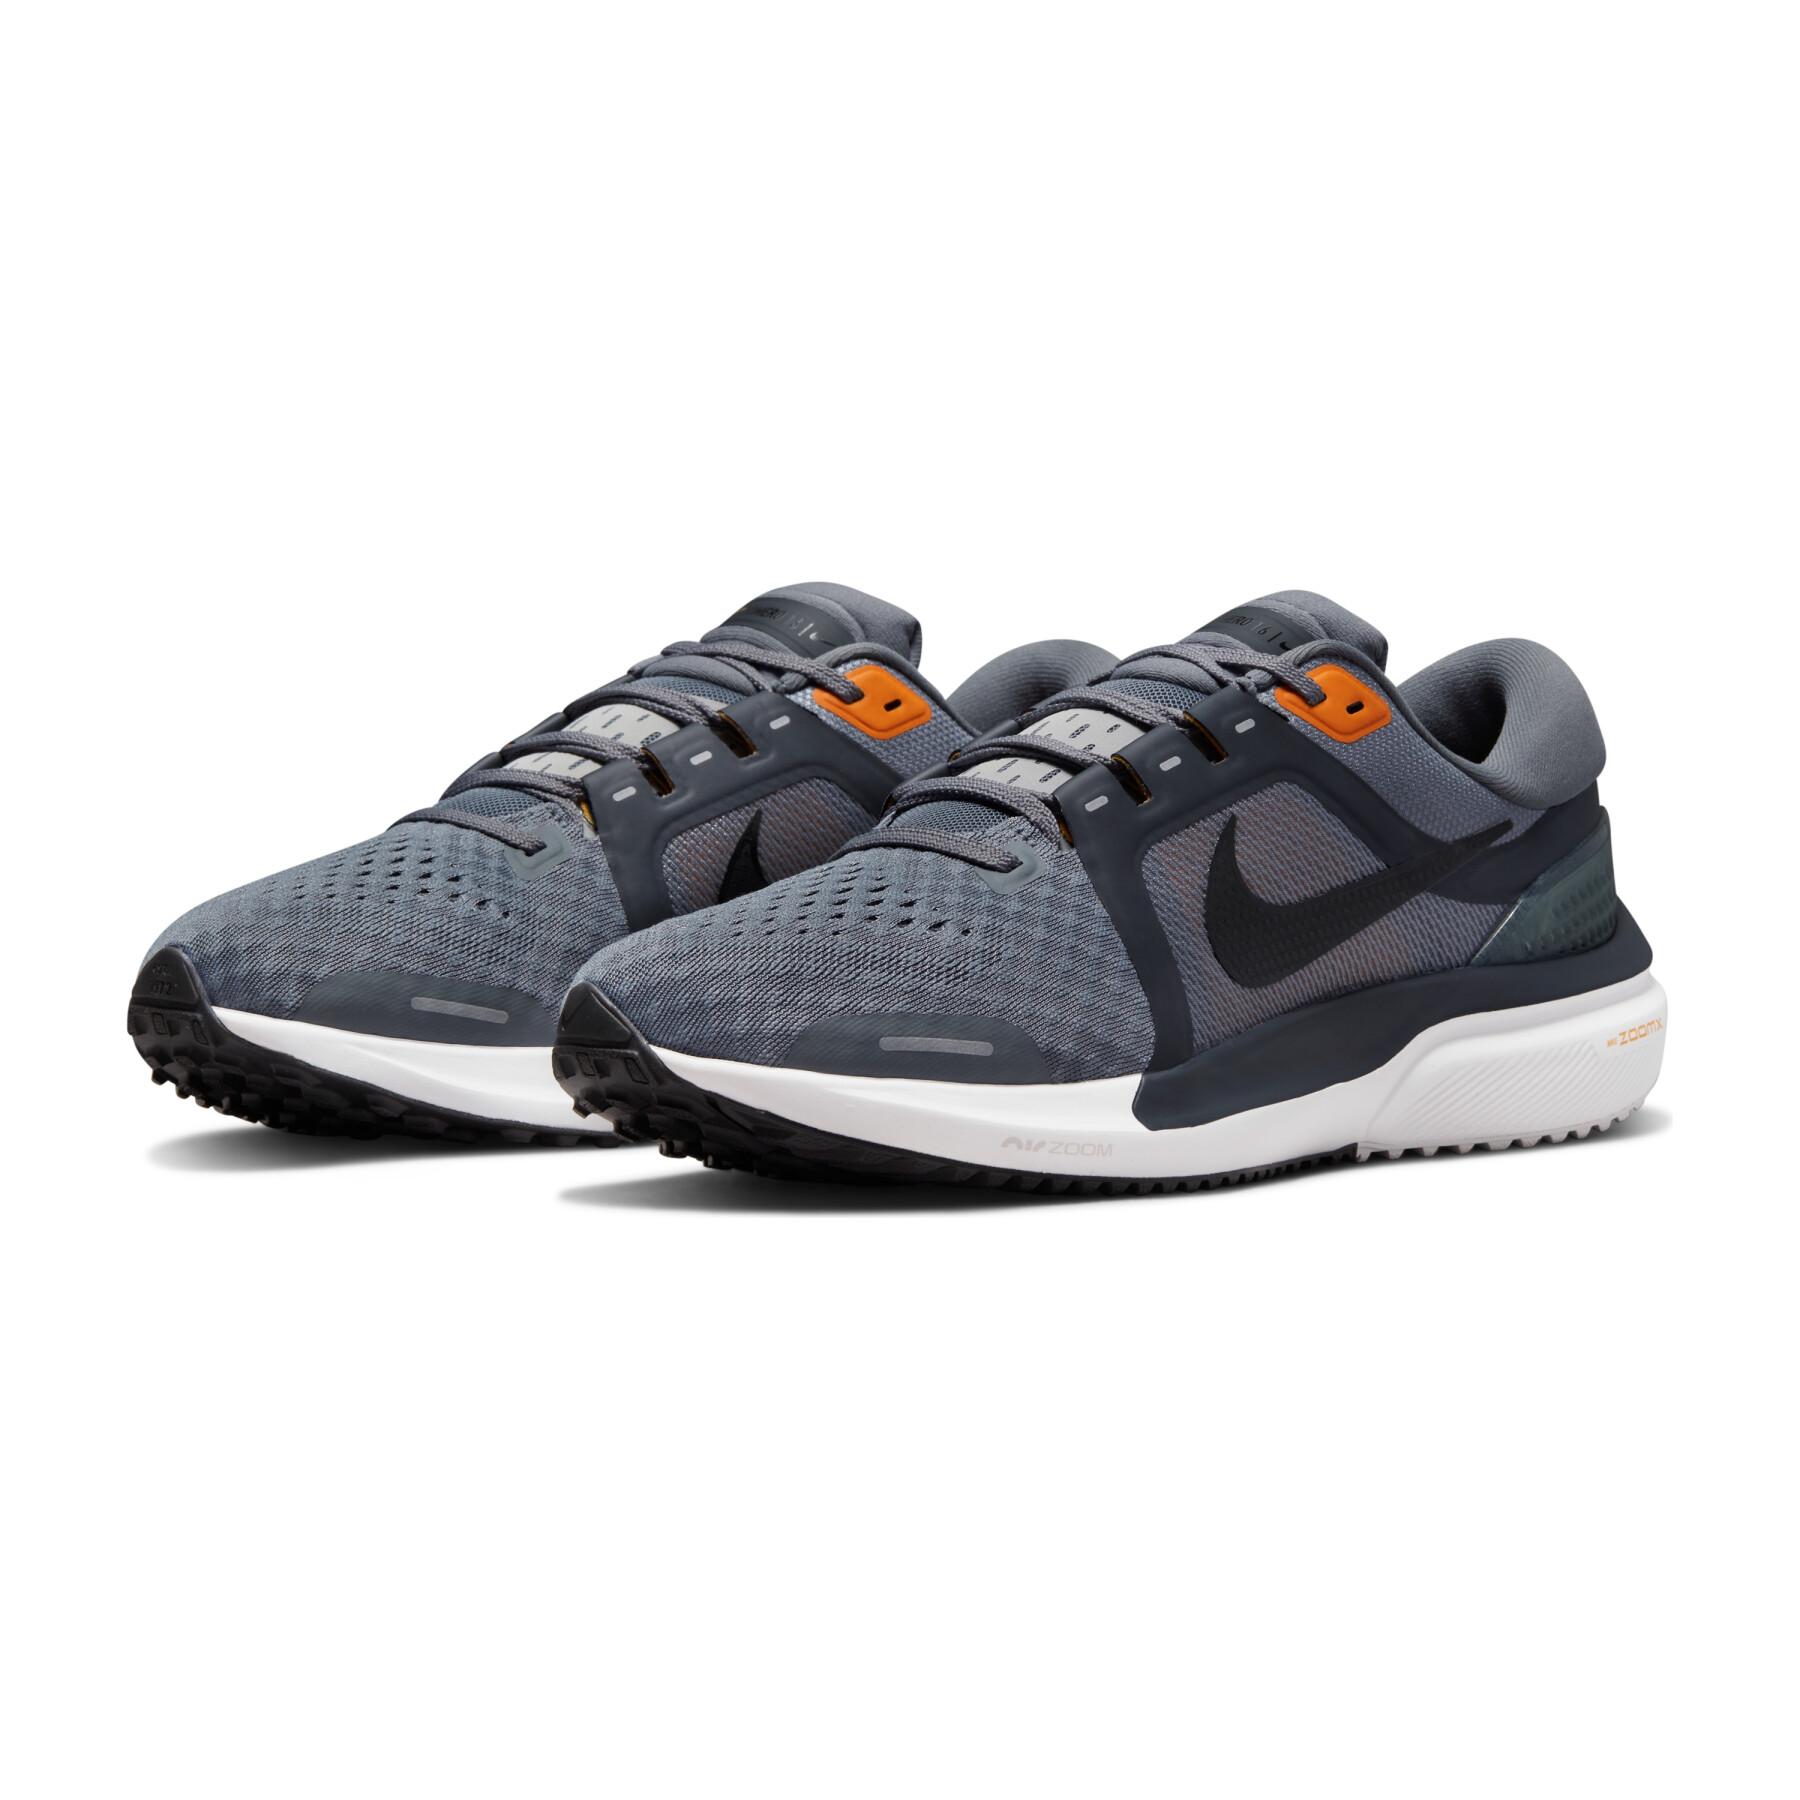 Shoes Nike Air Zoom Vomero 16